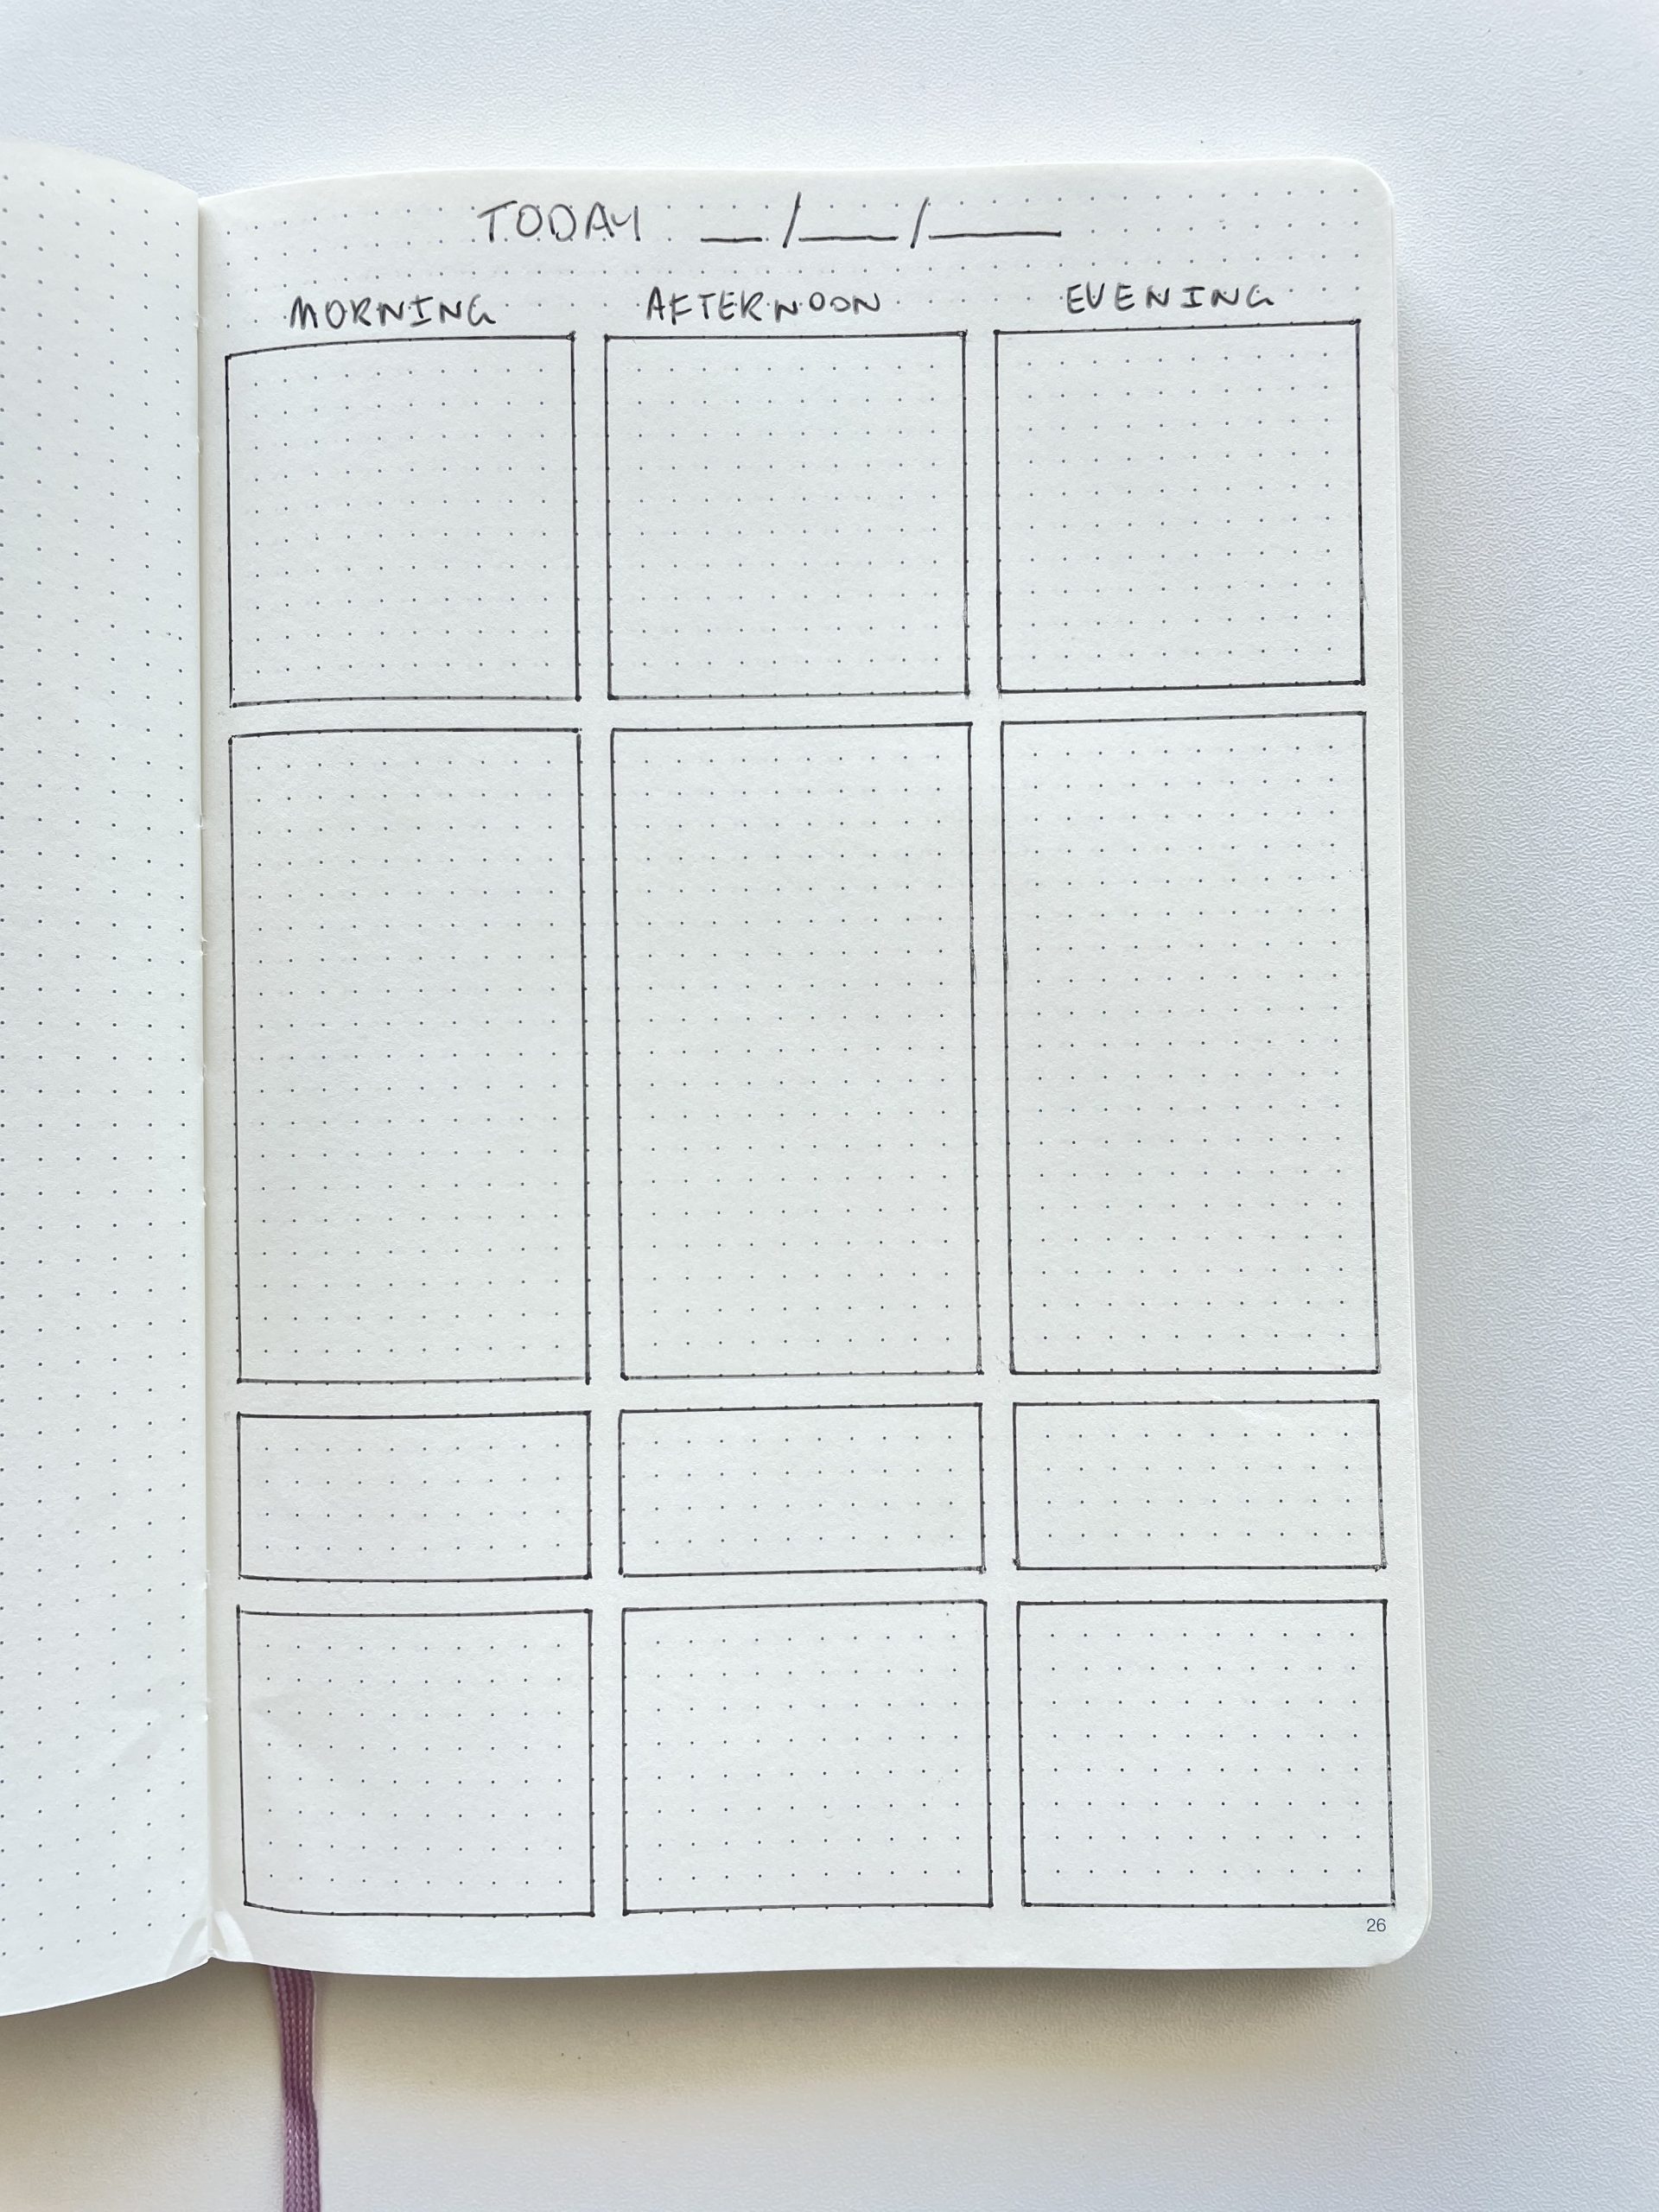 bujo daily spread morning afternoon evening categorised day to a page layout bullet journal quick simple minimalist fast setup draw